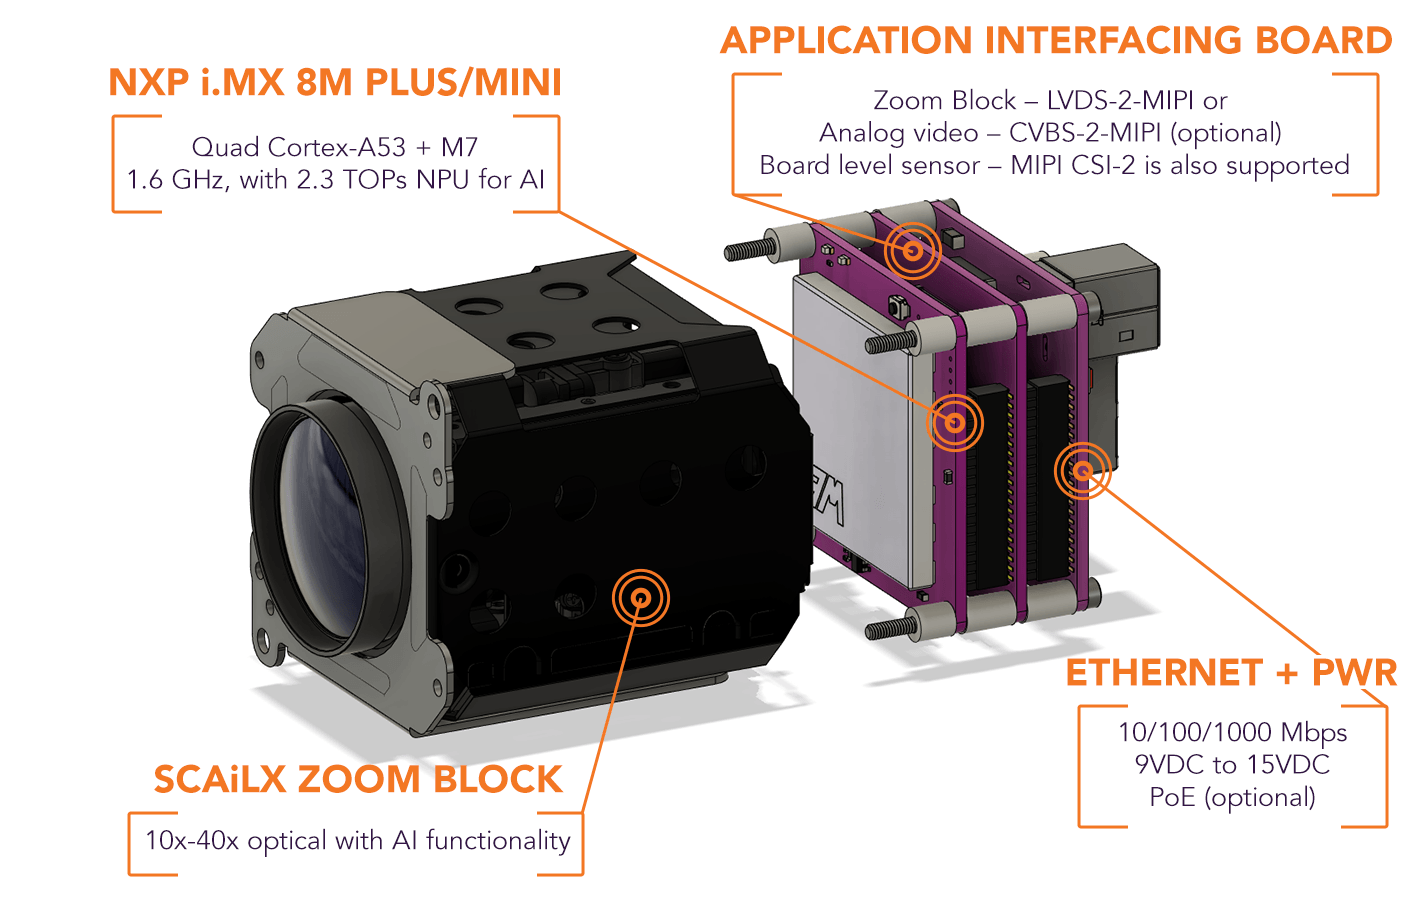 inTEST Corporation to Demonstrate Innovative SCAiLX™ Zoom Block Camera Technology